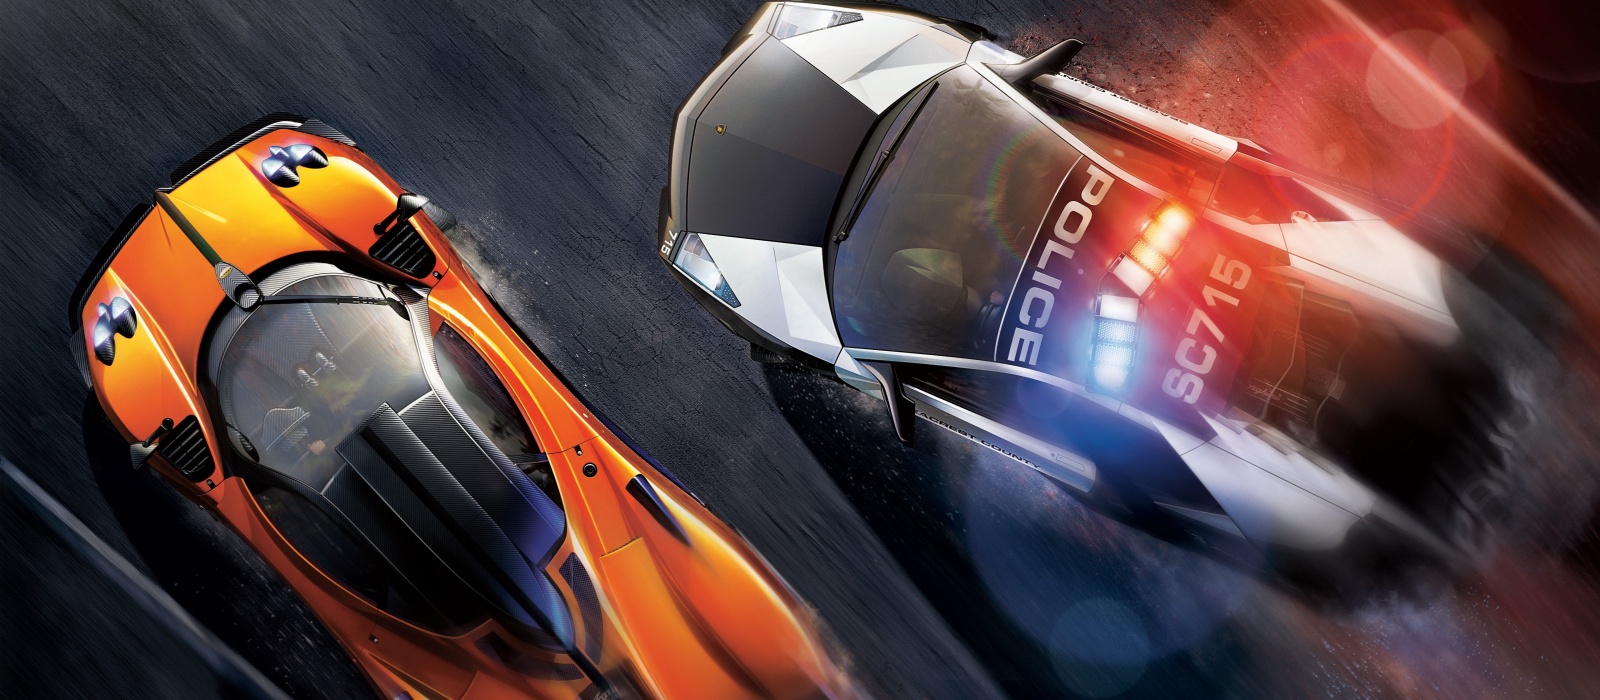 Need For Speed: Hot Pursuit Remastered Review. (Is this the same game?)